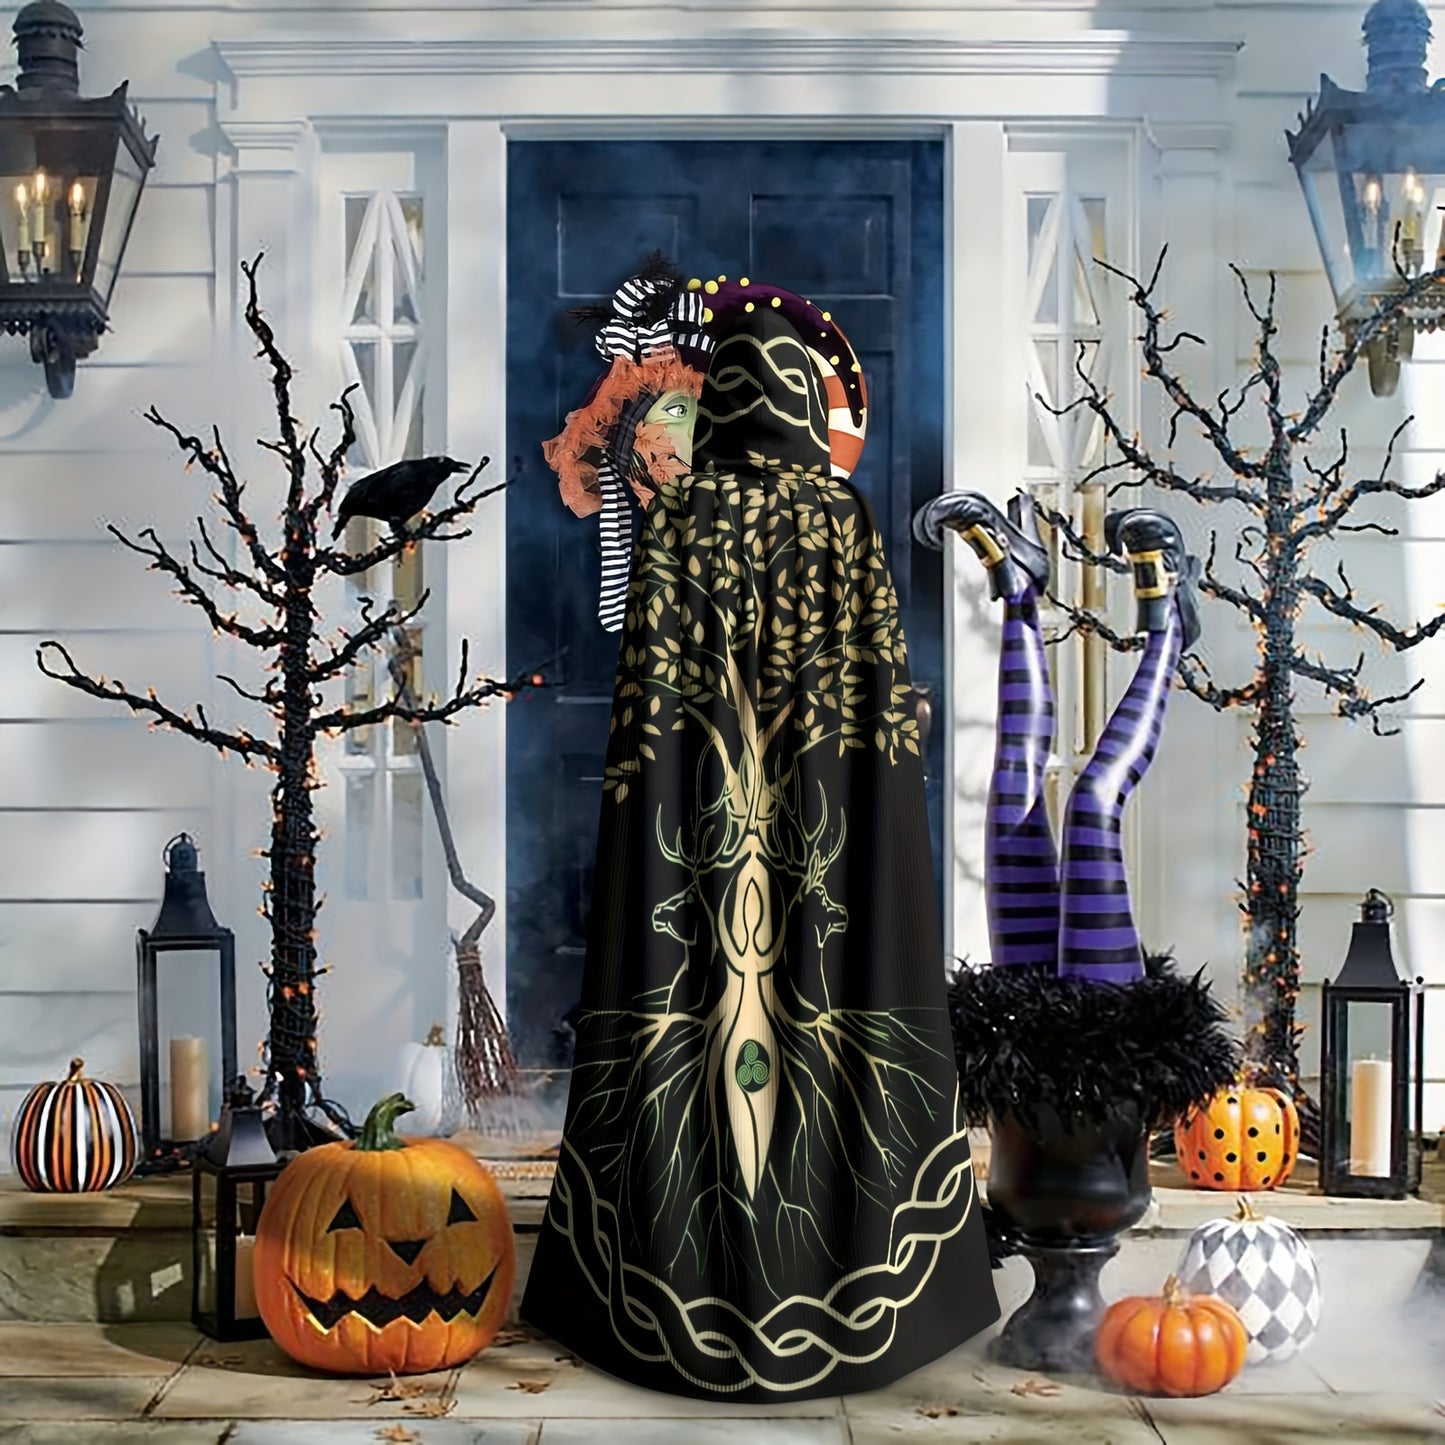 A person in a hooded, tree motif cloak stands in front of a door decorated for Halloween with pumpkins, lanterns, black trees, and witch legs; the vintage-inspired scene is accentuated by the intricate knitting details on their Maramalive™ 1pc, Nordic Style Viking Goddess Wiccan Wicca Halloween Wizard Witch Hooded Robe Cloak Christmas Hoodies Cape Cosplay For Adult Men Women Party Favors Supplies Dresses Clothes Gifts Costume.